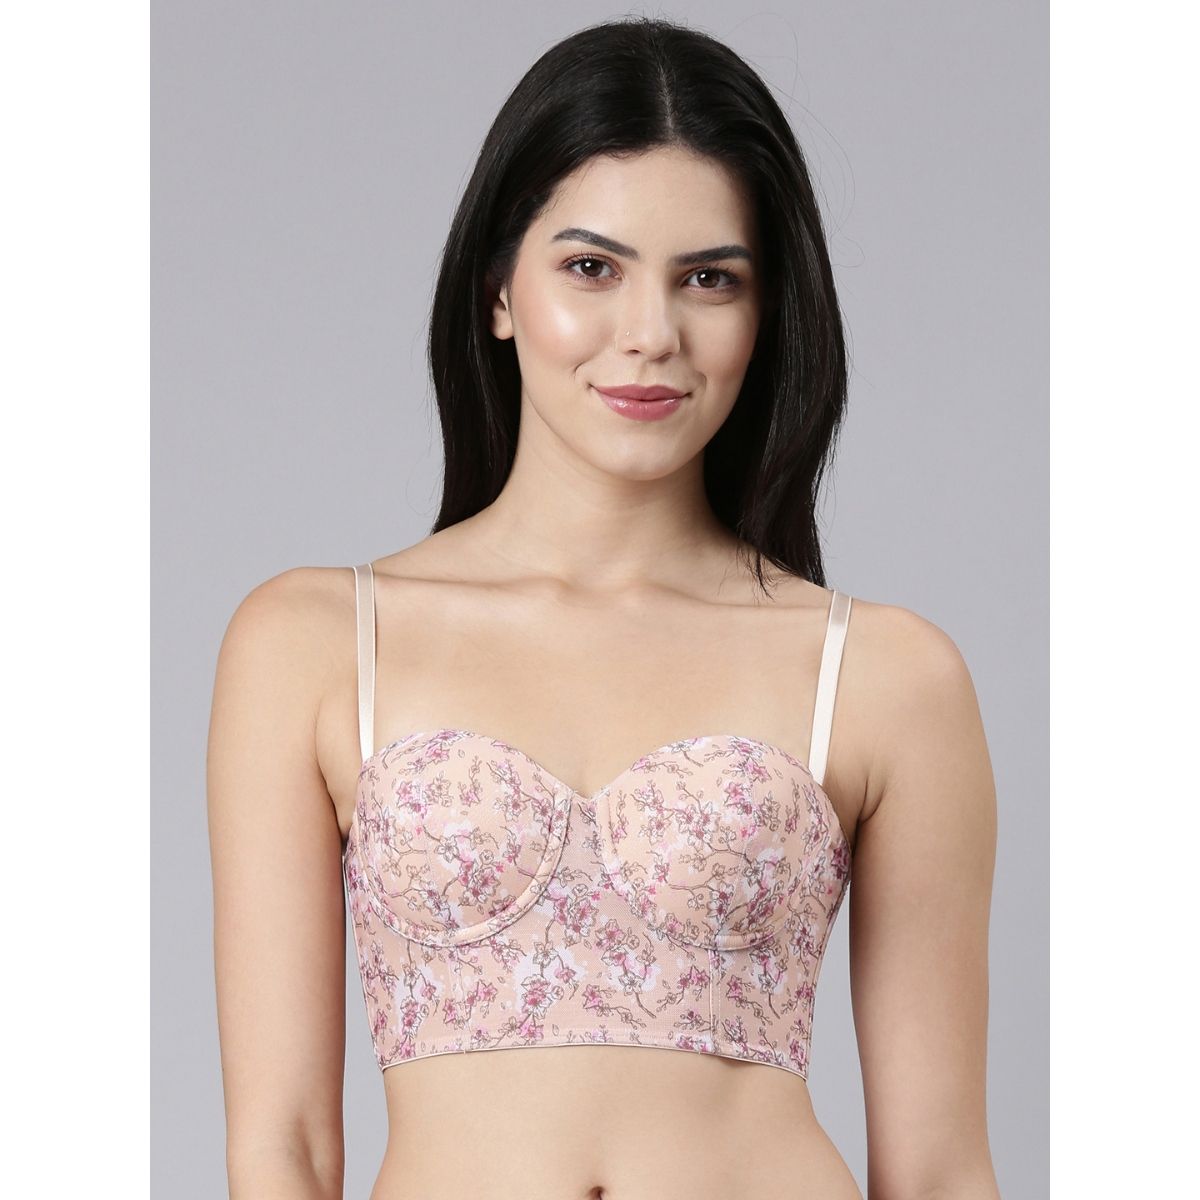 Enamor on Instagram: Elevate your glam game with Enamor's Flexi Light  Bustier Bra available in two attractive prints – Cherry blossom & Wisteria  Print. Witness style, comfort, and fashion uniting to make